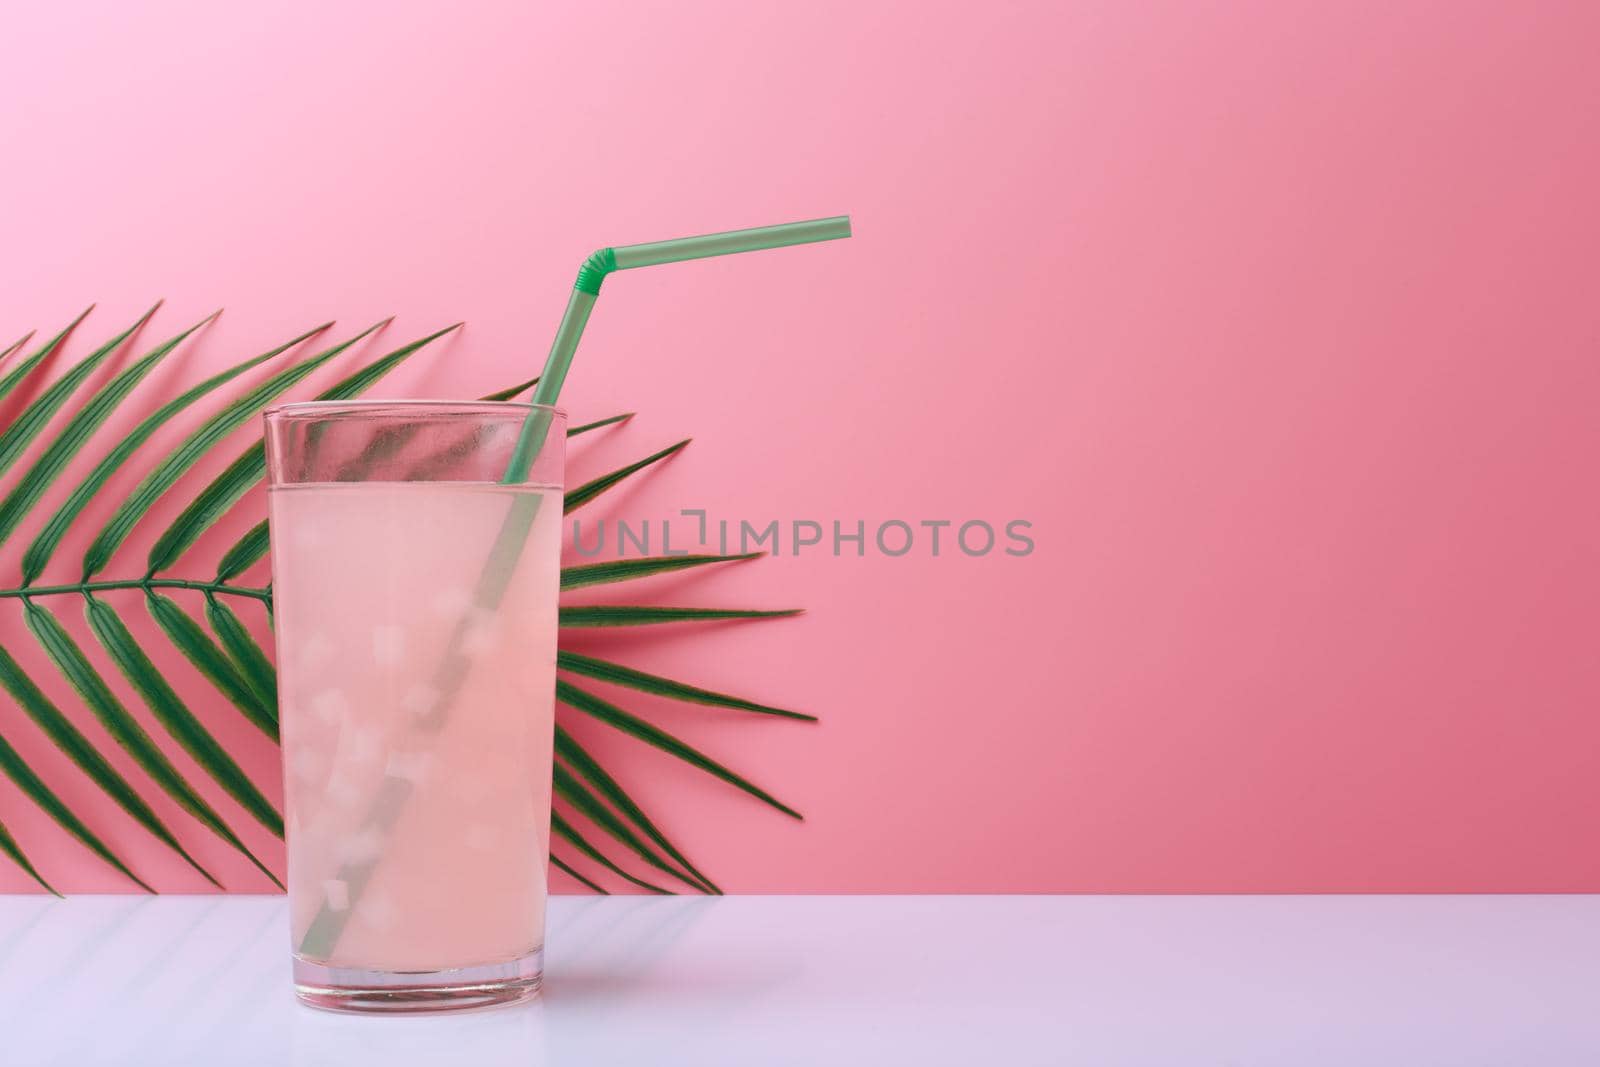 Creative summer composition with light pink fruit drink or lemonade with pieces of fruit and green straw on white table against pink background with palm leaf and copy space. Concept of refreshing cold drinks for summer or detox drinks